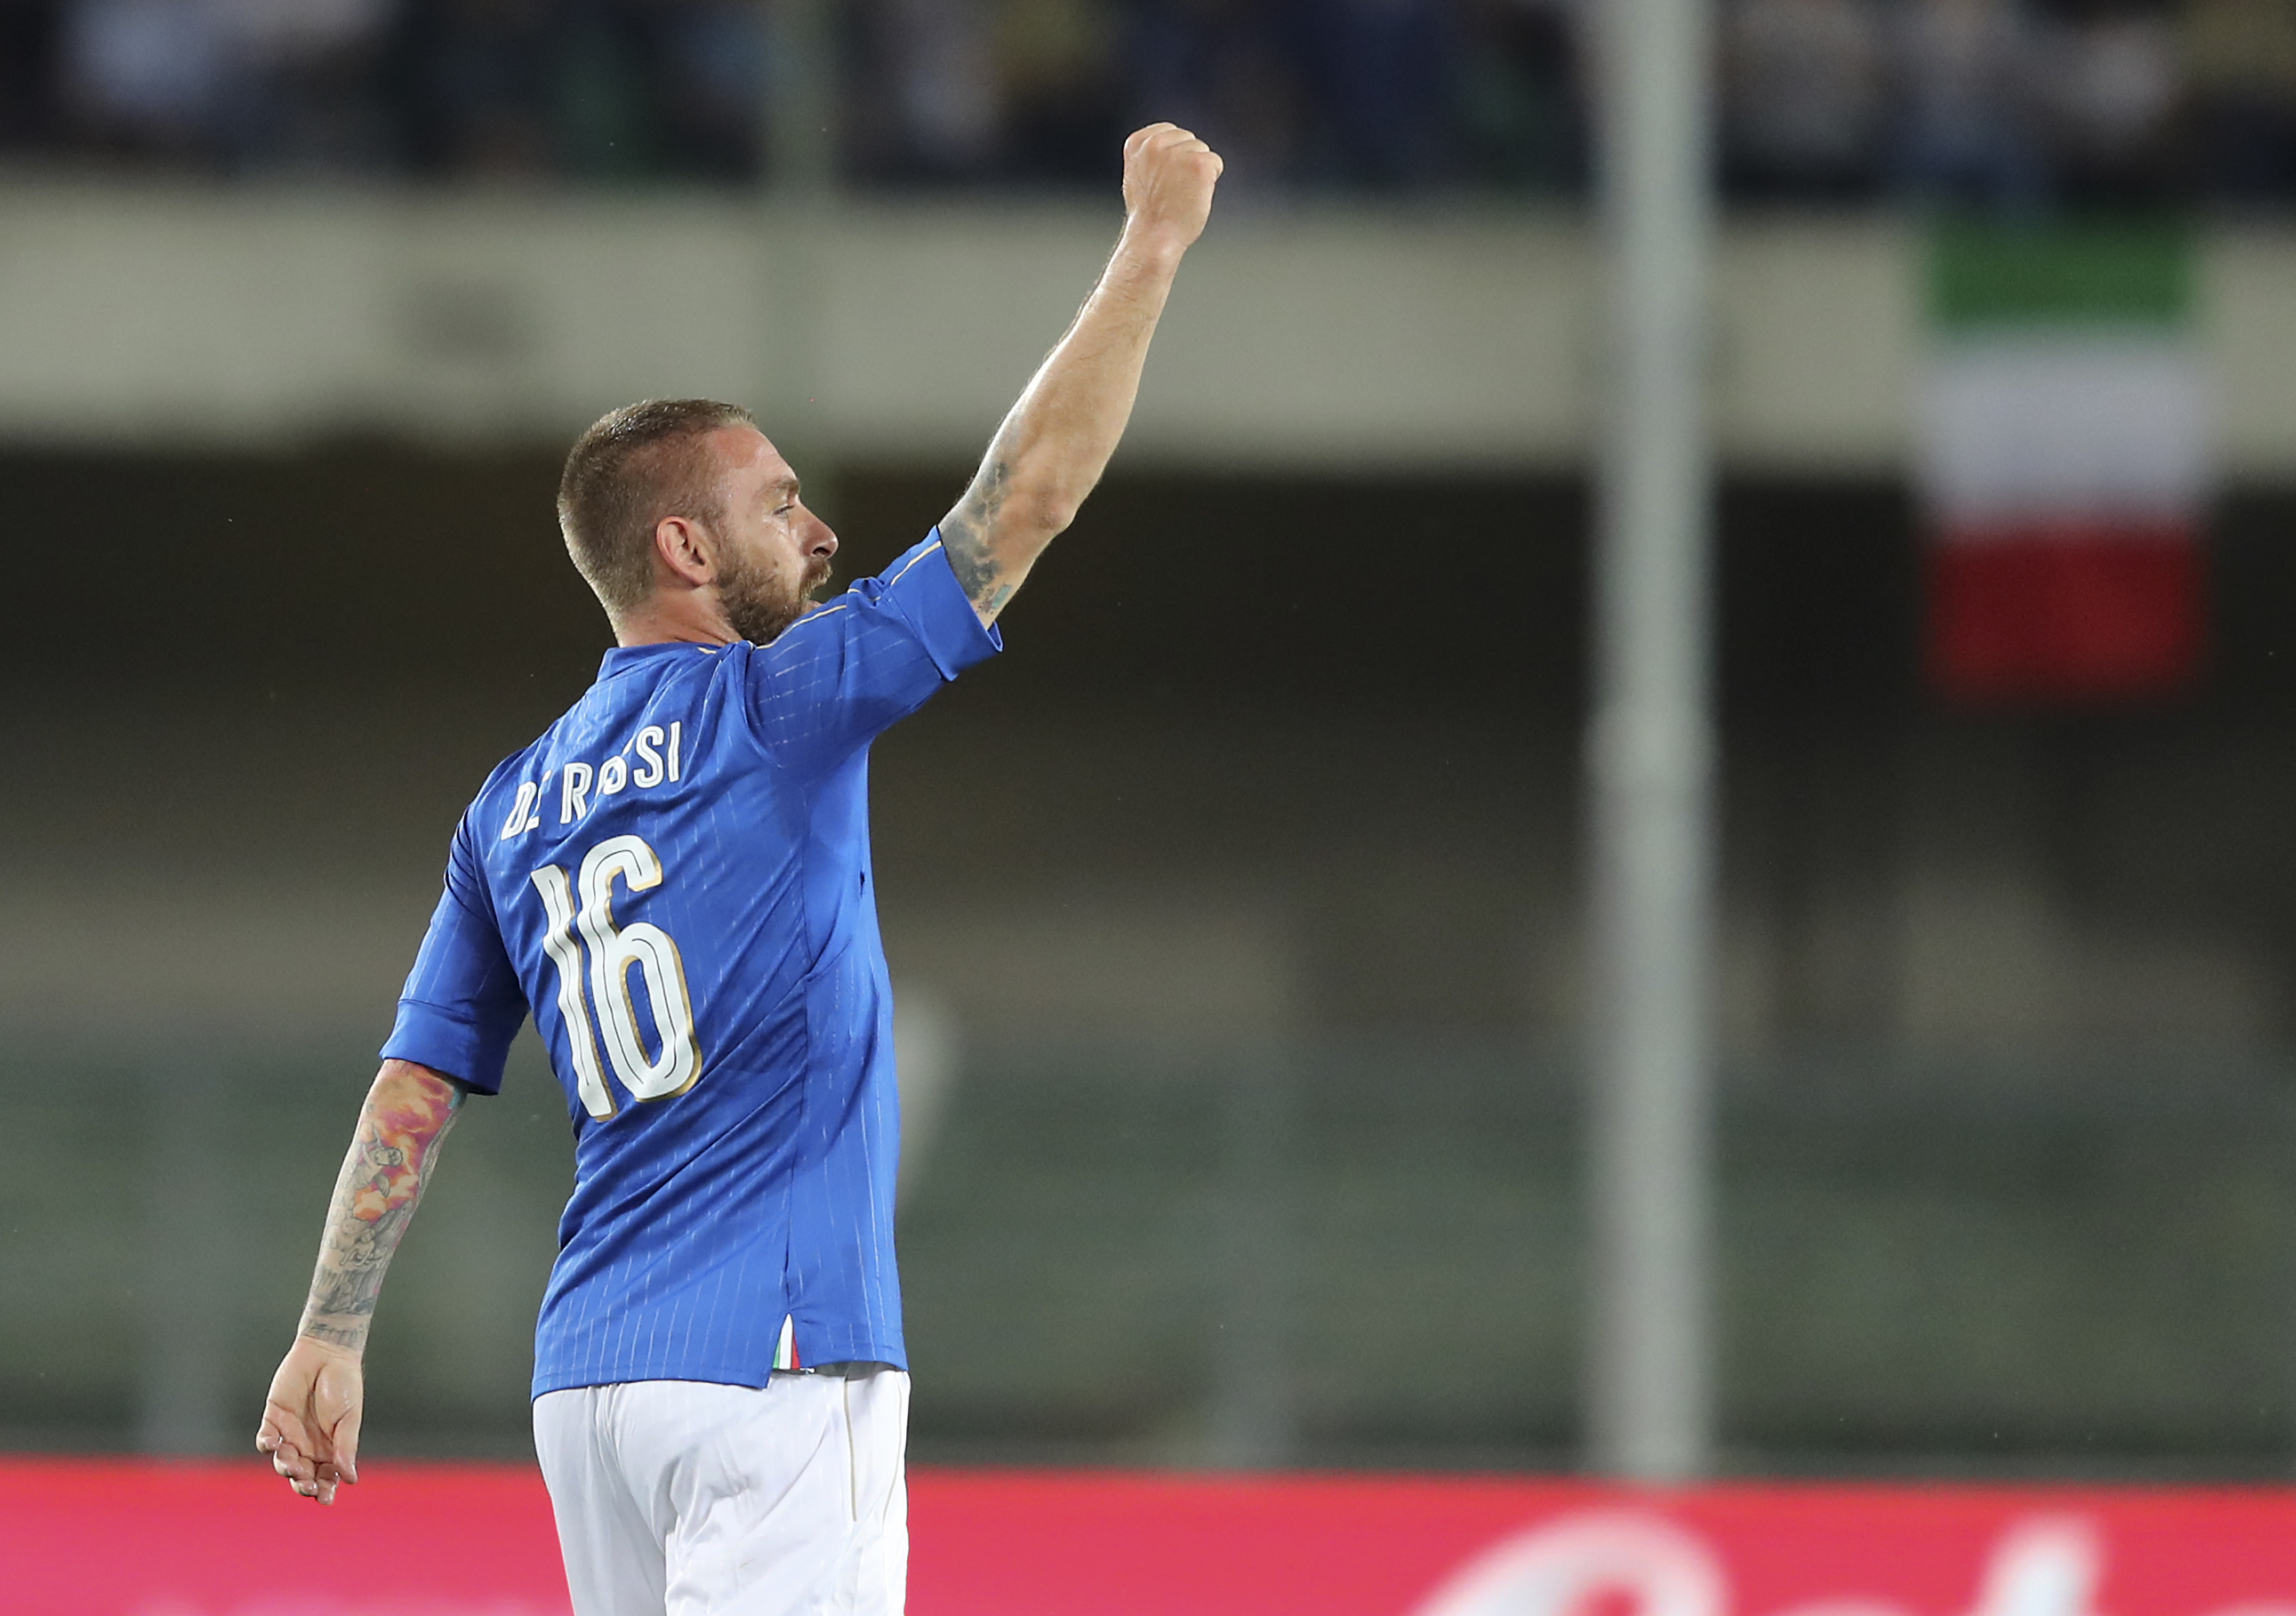 Daniele De Rossi Italy AS Roma Jersey Football FiFA World Cup Soccer Football Player 2582x1817